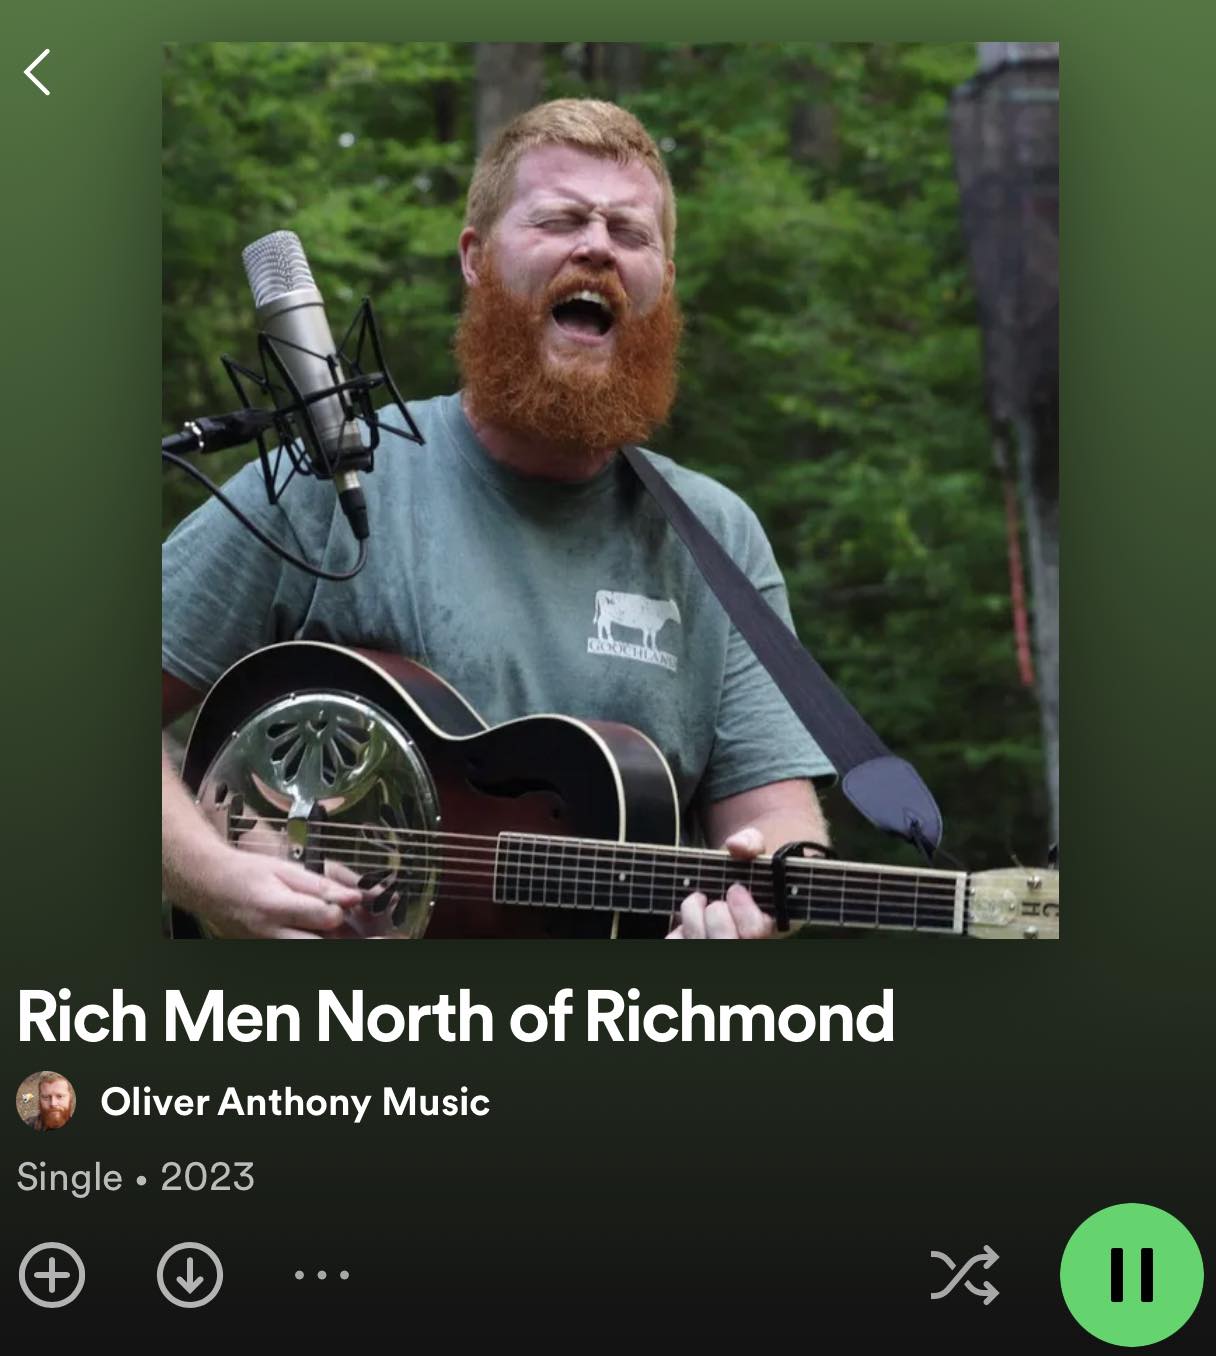 Here Are the Lyrics to Oliver Anthony Music’s ‘Rich Men North of